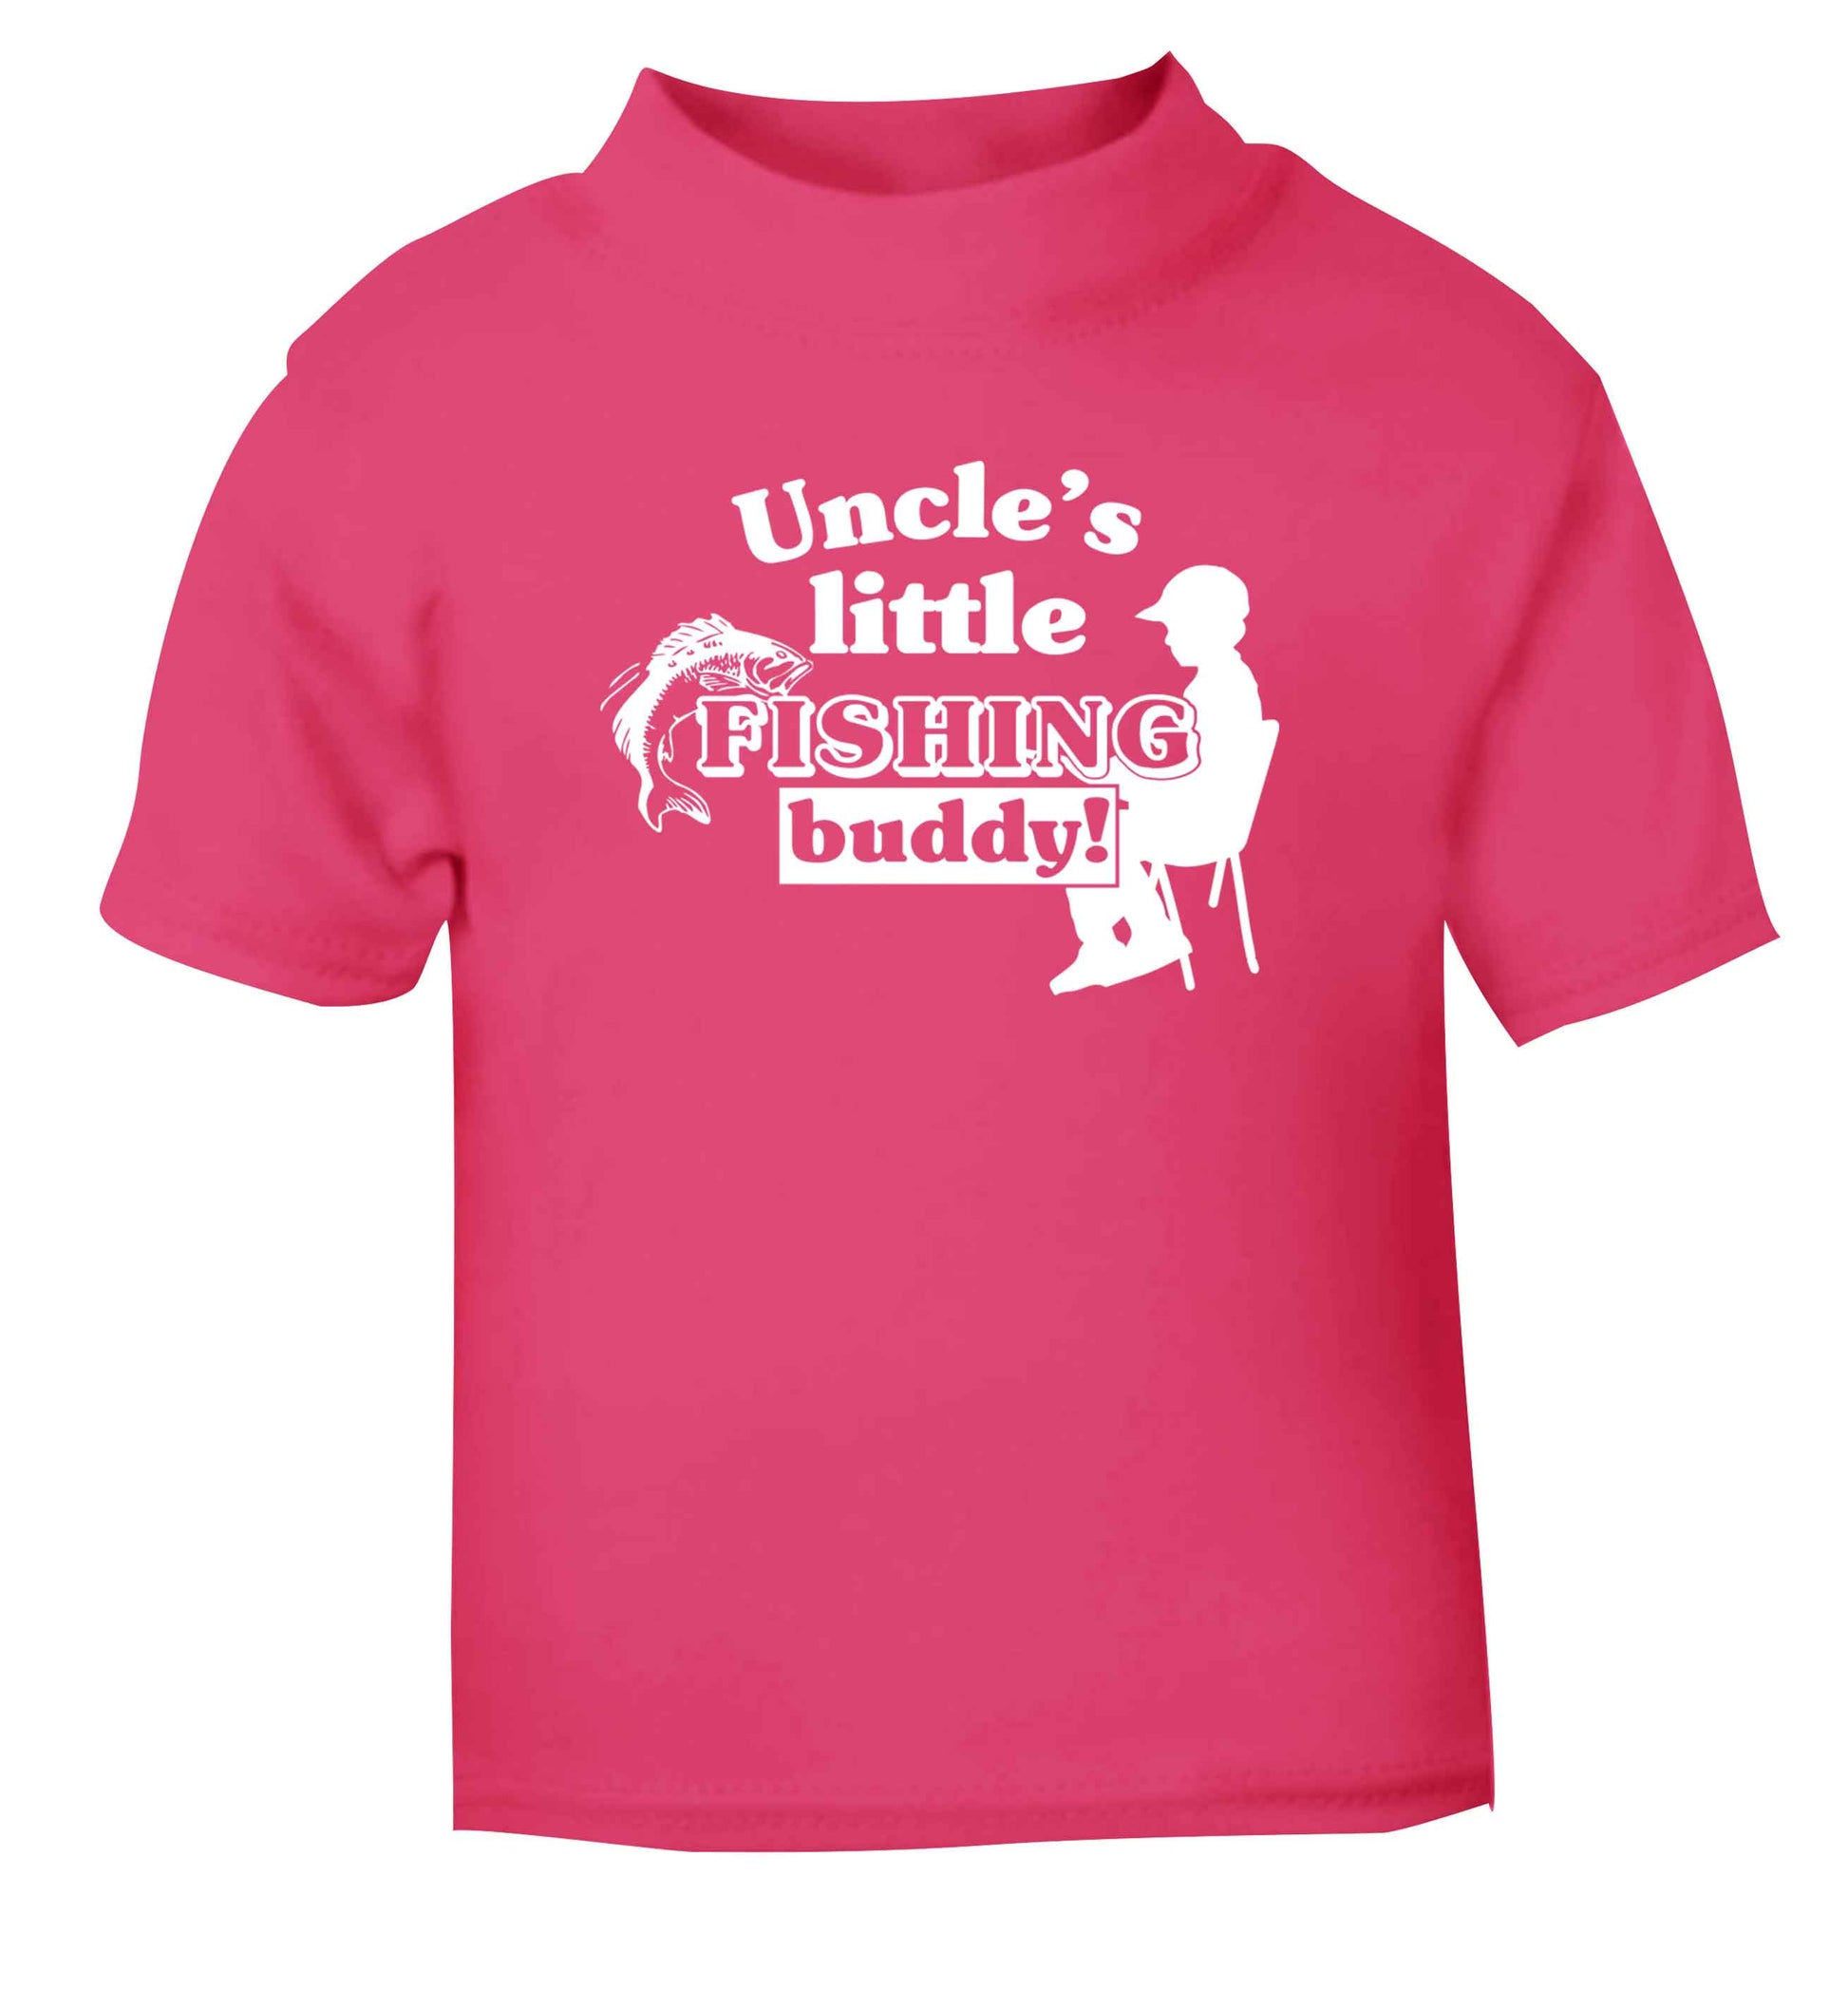 Uncle's little fishing buddy pink Baby Toddler Tshirt 2 Years